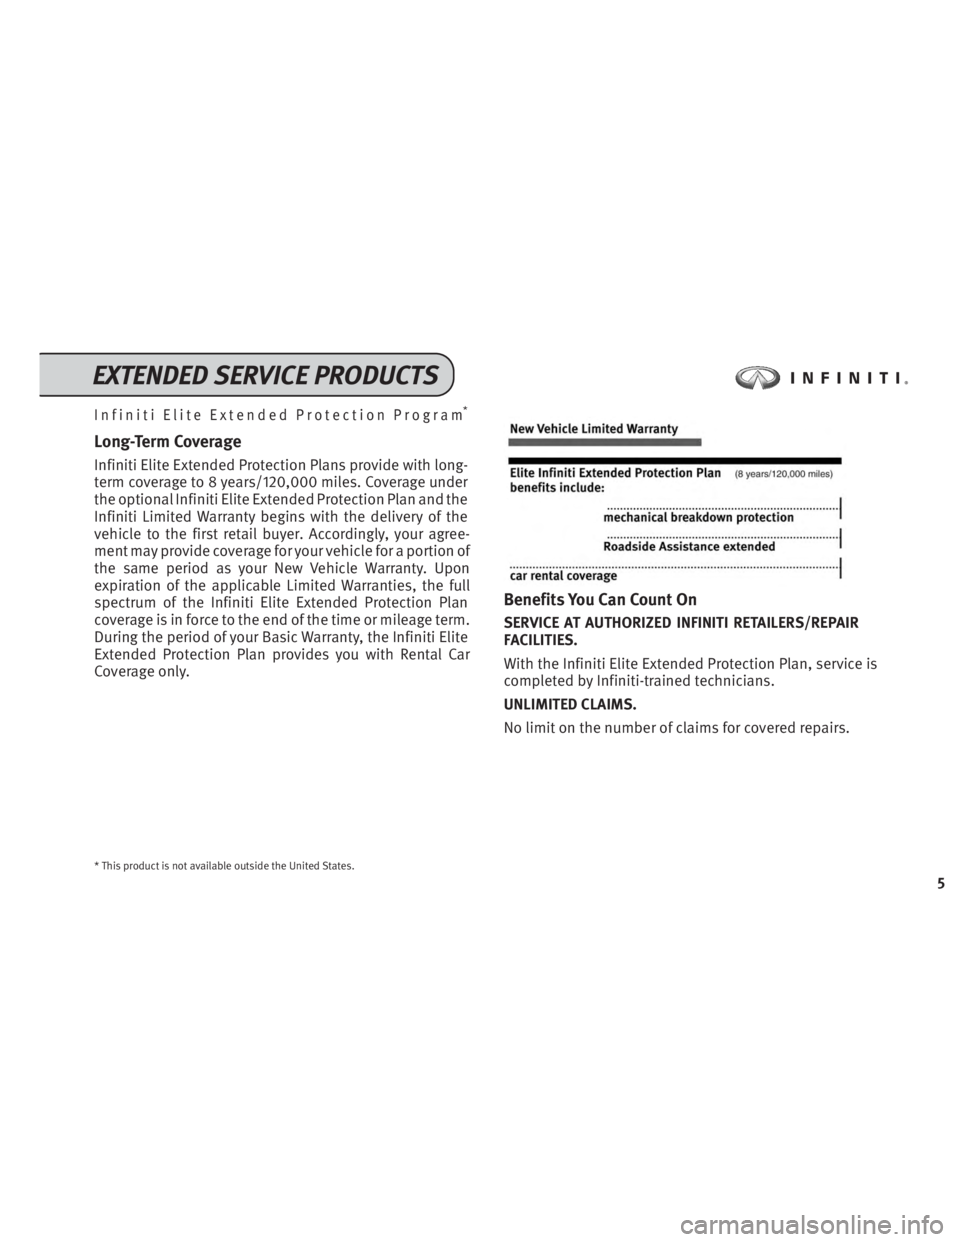 INFINITI QX60 2014  Service And Maintenance Guide Infiniti Elite Extended Protection Program*
Long-Term Coverage
Infiniti Elite Extended Protection Plans provide with long-
term coverage to 8 years/120,000 miles. Coverage under
the optional Infiniti 